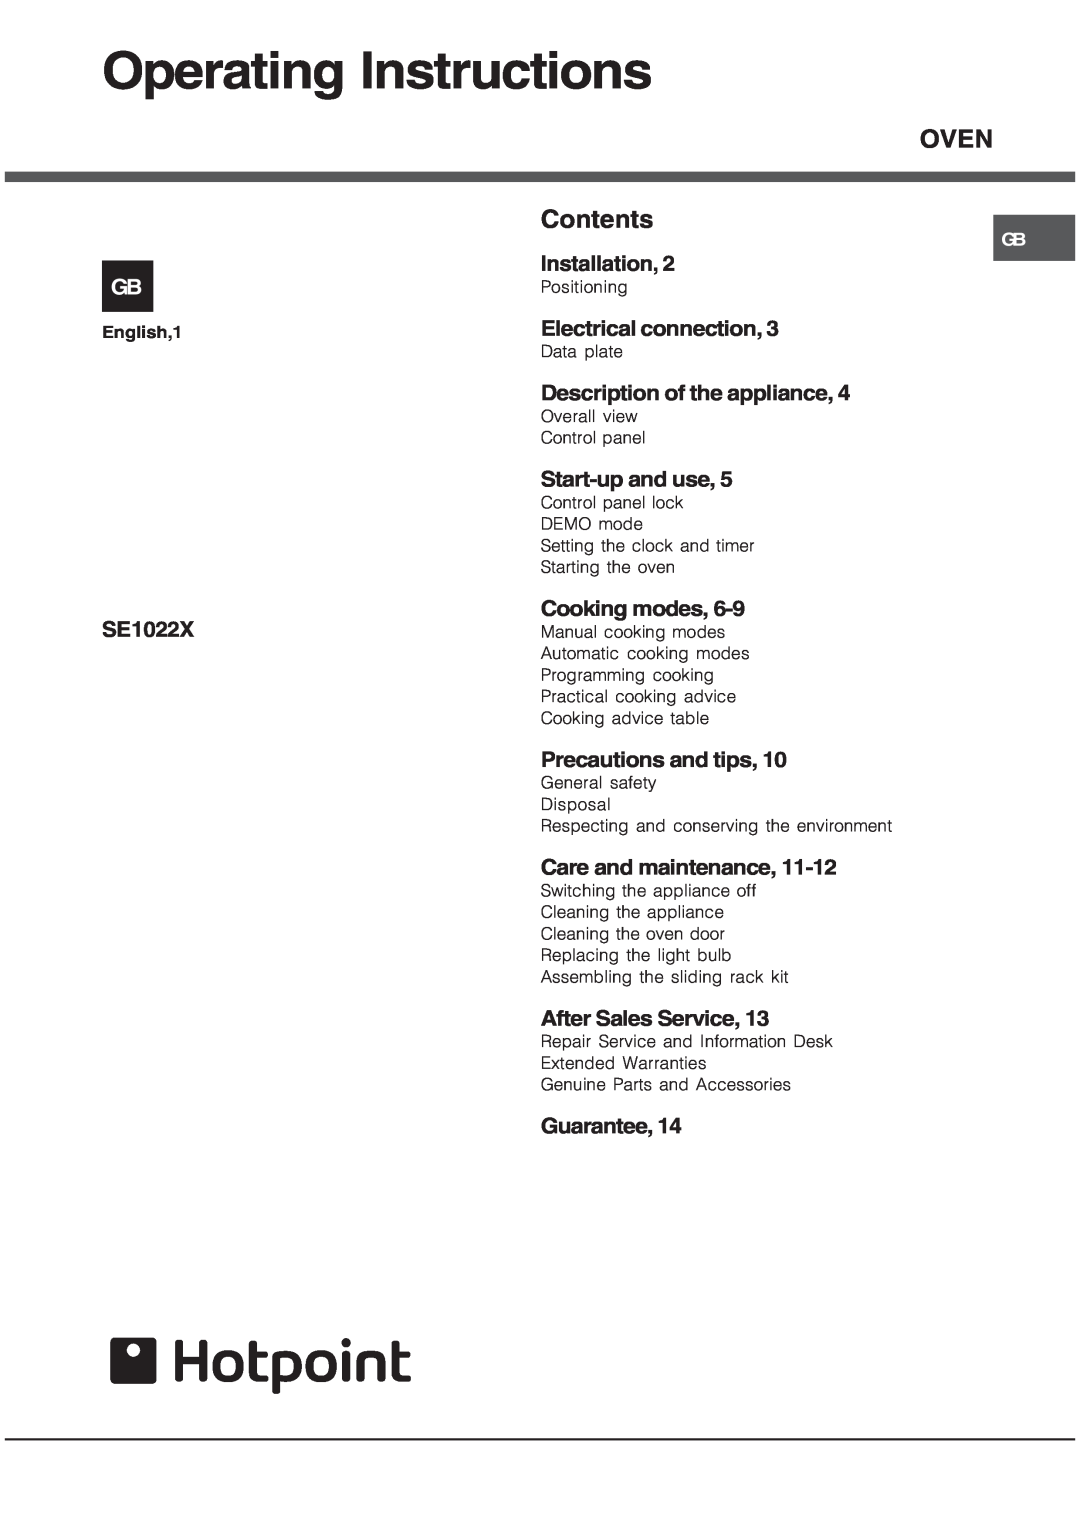 Hotpoint SE1022X manual Operating Instructions, OVEN Contents 